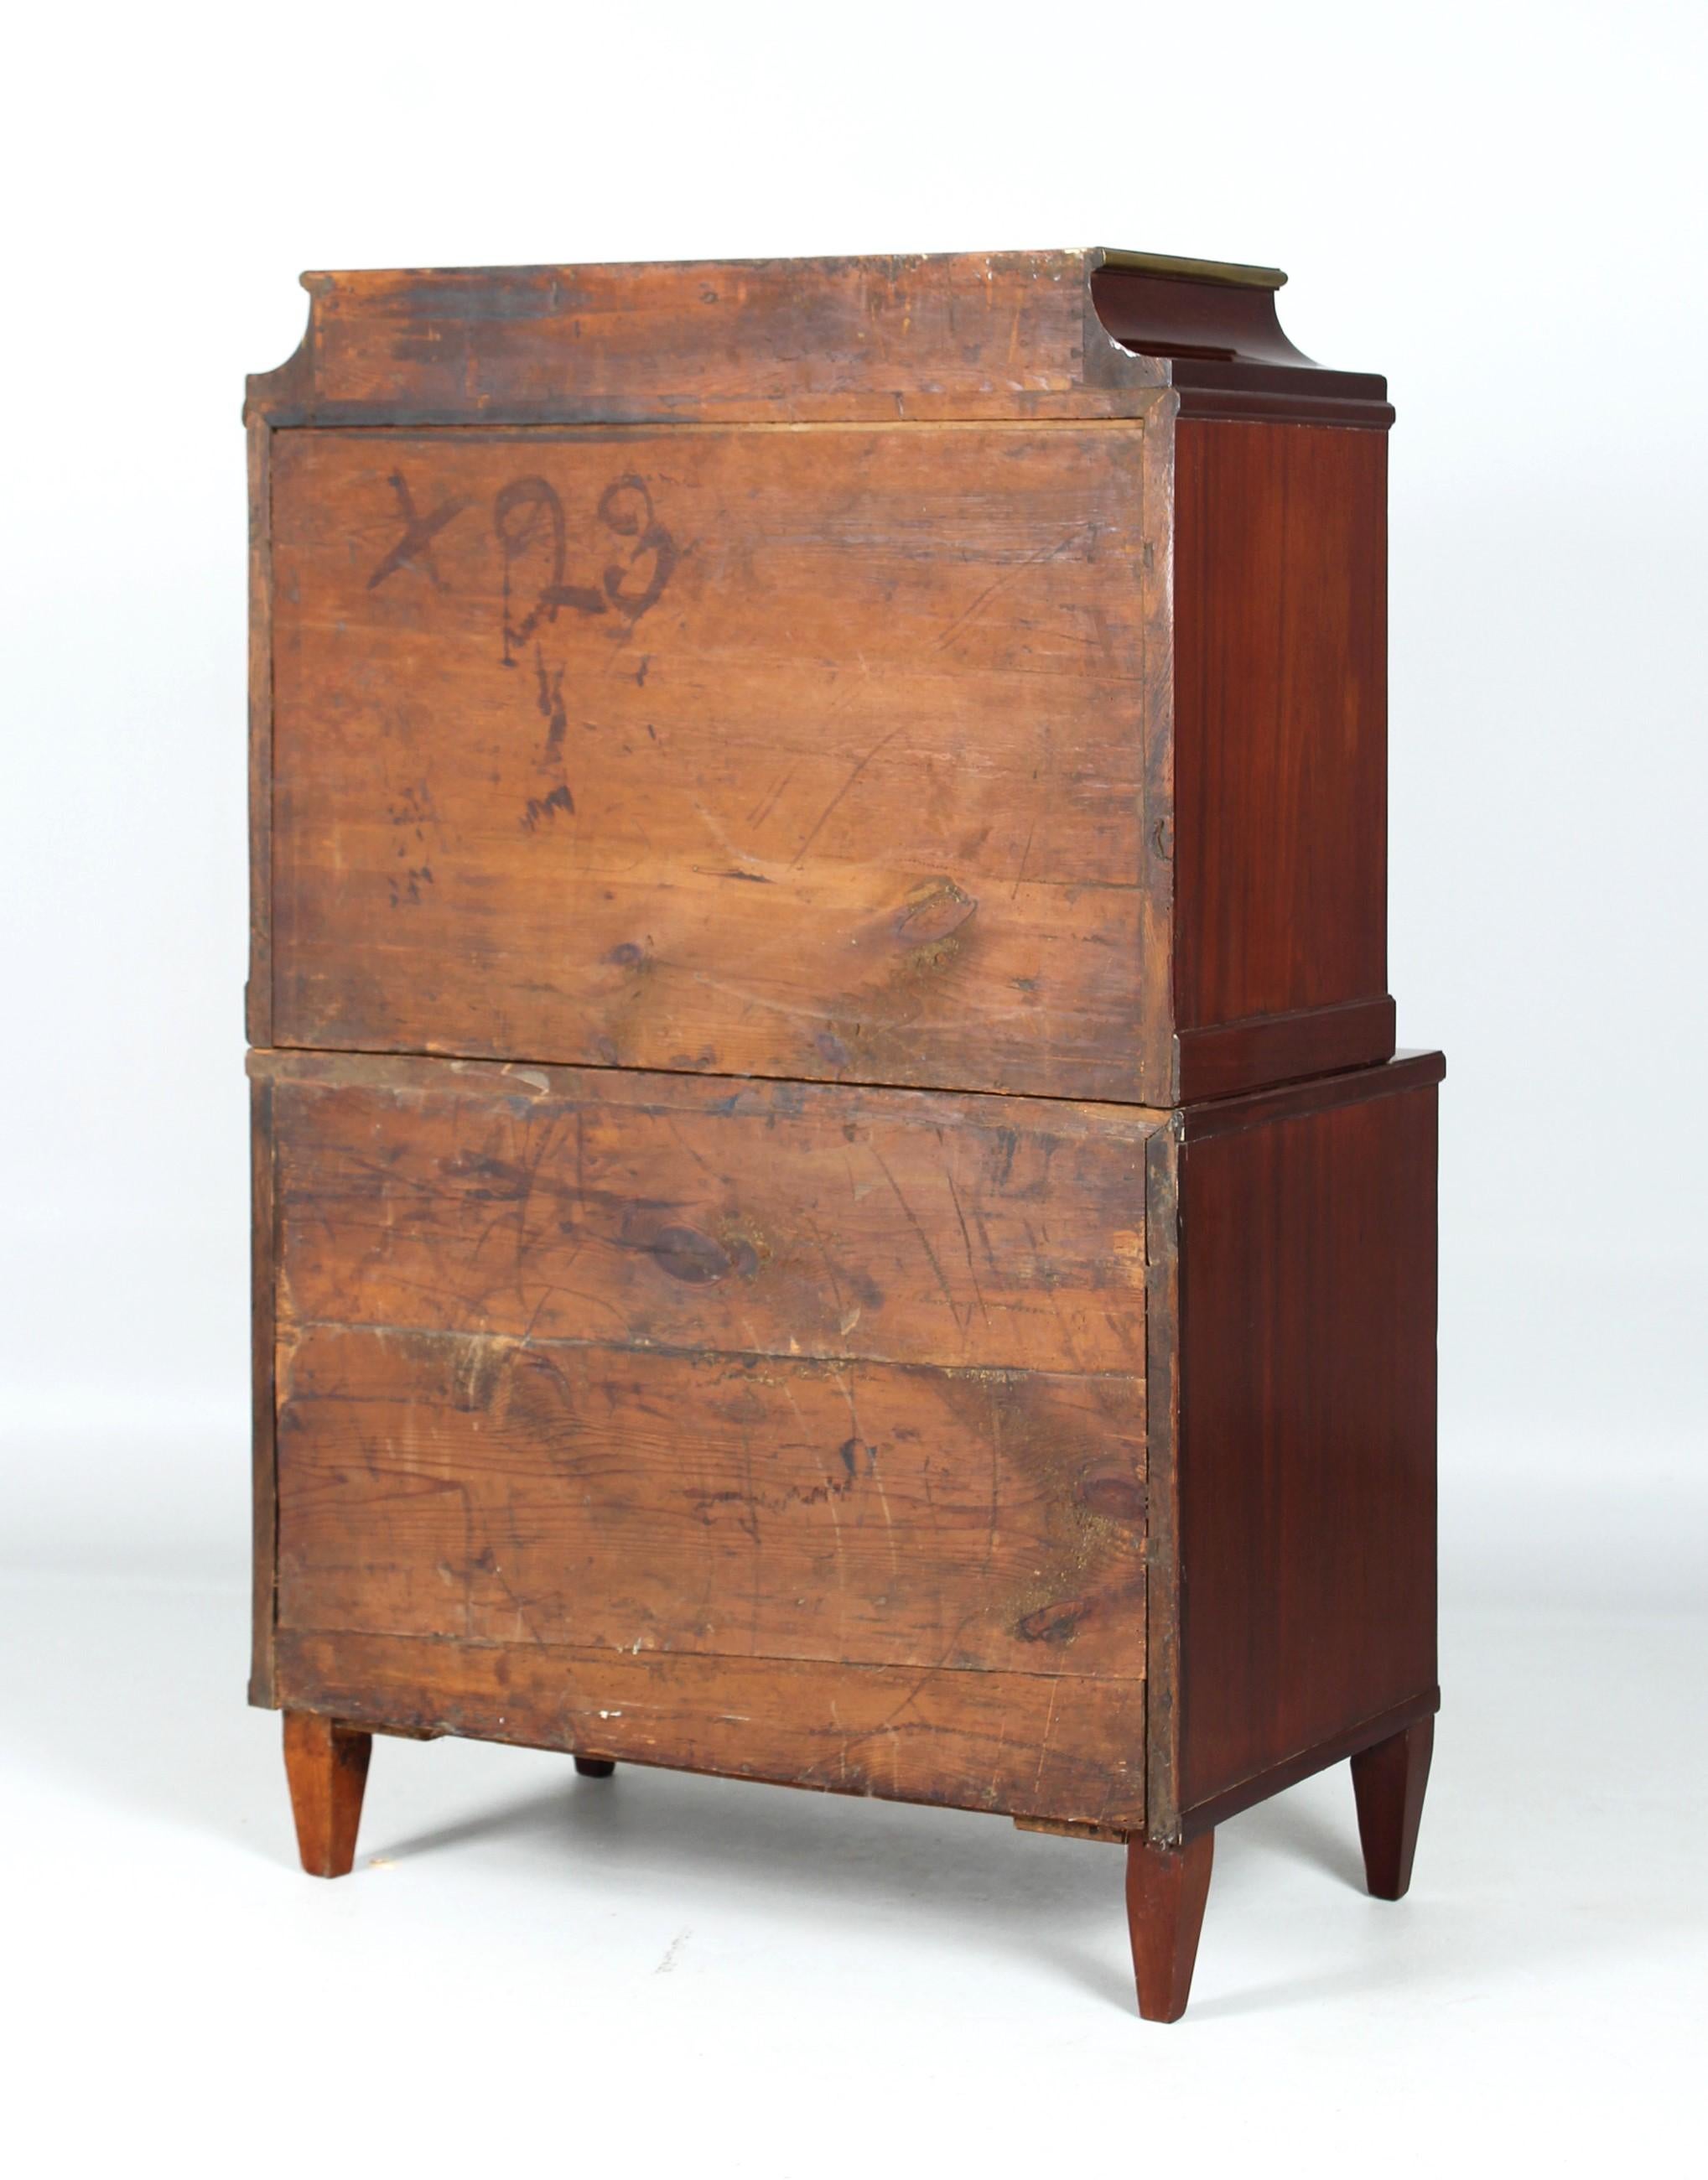 Late 18th or Early 19th Century Secretary with Hidden Mechanisms, Mahogany For Sale 11